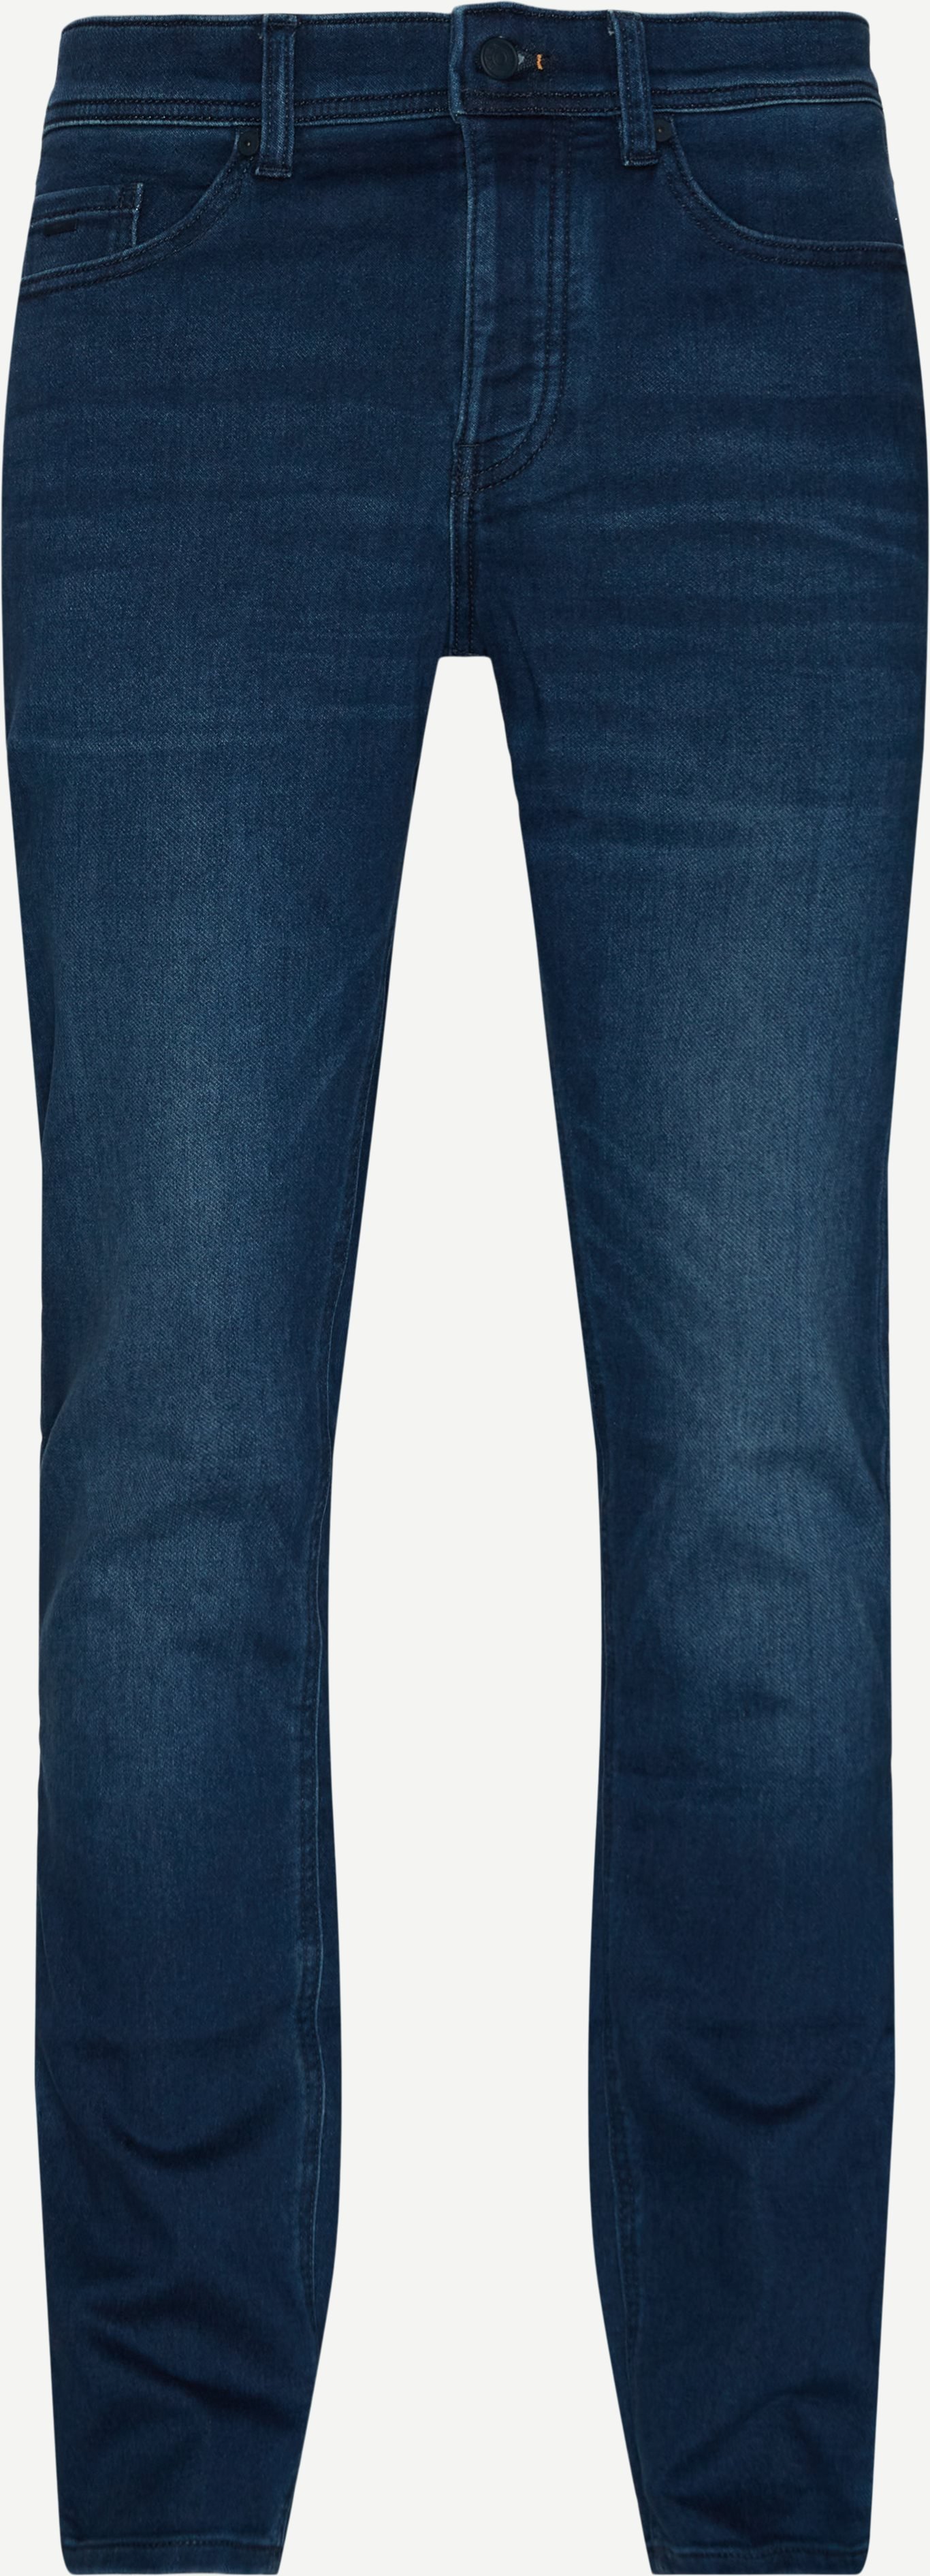 Taber BC-SP-1 Reha-Jeans - Jeans - Tapered fit - Jeans-Blau